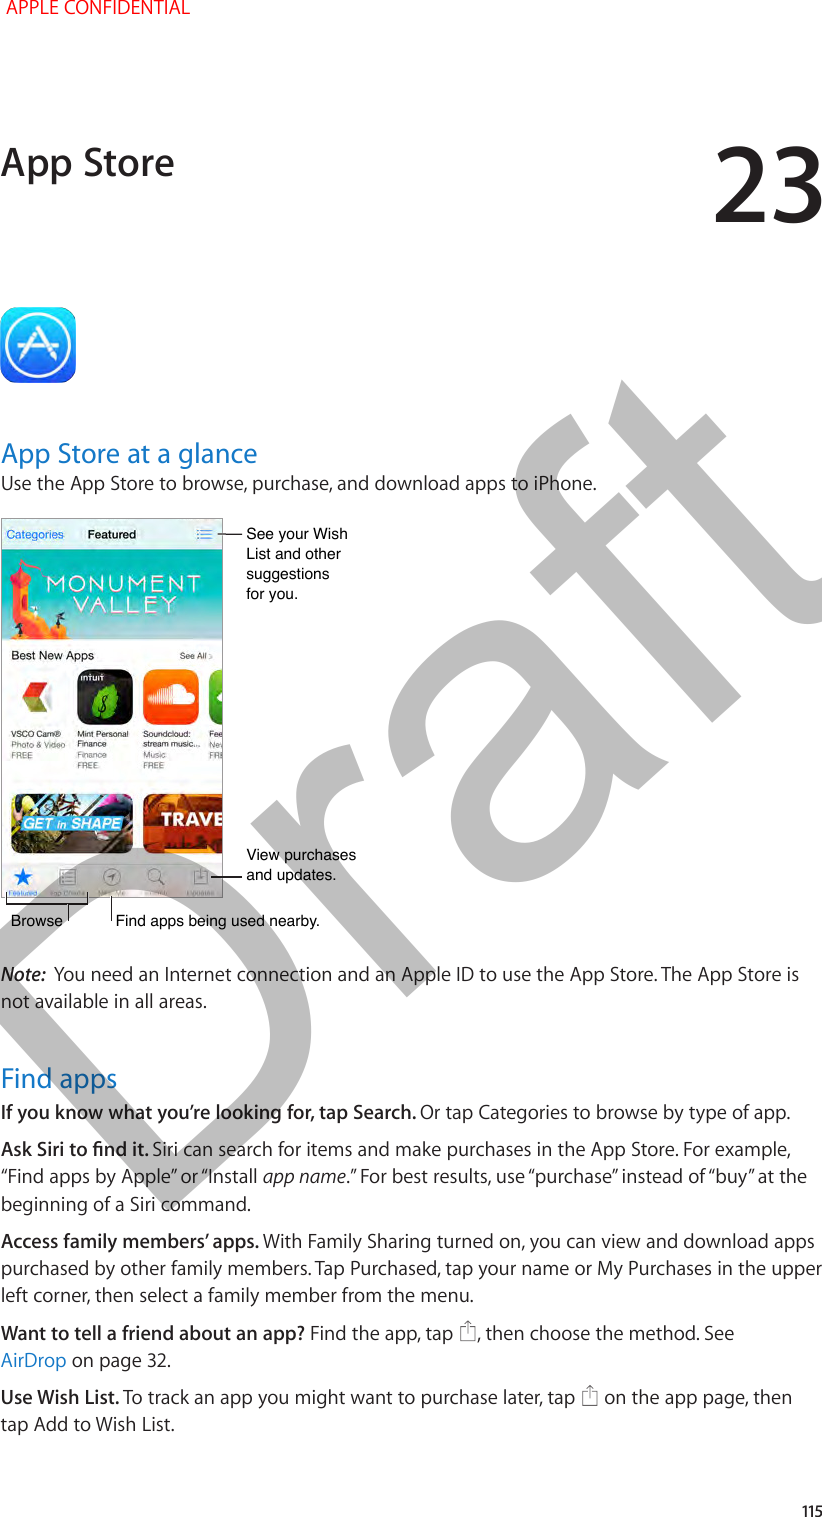 23   115App Store at a glanceUse the App Store to browse, purchase, and download apps to iPhone.View purchases and updates.View purchases and updates.BrowseBrowseFind apps being used nearby.Find apps being used nearby.See your Wish List and other suggestionsfor you.See your Wish List and other suggestionsfor you.Note:  You need an Internet connection and an Apple ID to use the App Store. The App Store is not available in all areas.Find appsIf you know what you’re looking for, tap Search. Or tap Categories to browse by type of app.Ask Siri to nd it. Siri can search for items and make purchases in the App Store. For example, “Find apps by Apple” or “Install app name.” For best results, use “purchase” instead of “buy” at the beginning of a Siri command.Access family members’ apps. With Family Sharing turned on, you can view and download apps purchased by other family members. Tap Purchased, tap your name or My Purchases in the upper left corner, then select a family member from the menu.Want to tell a friend about an app? Find the app, tap  , then choose the method. See AirDrop on page 32.Use Wish List. To track an app you might want to purchase later, tap   on the app page, then tap Add to Wish List.App Store APPLE CONFIDENTIALDraft